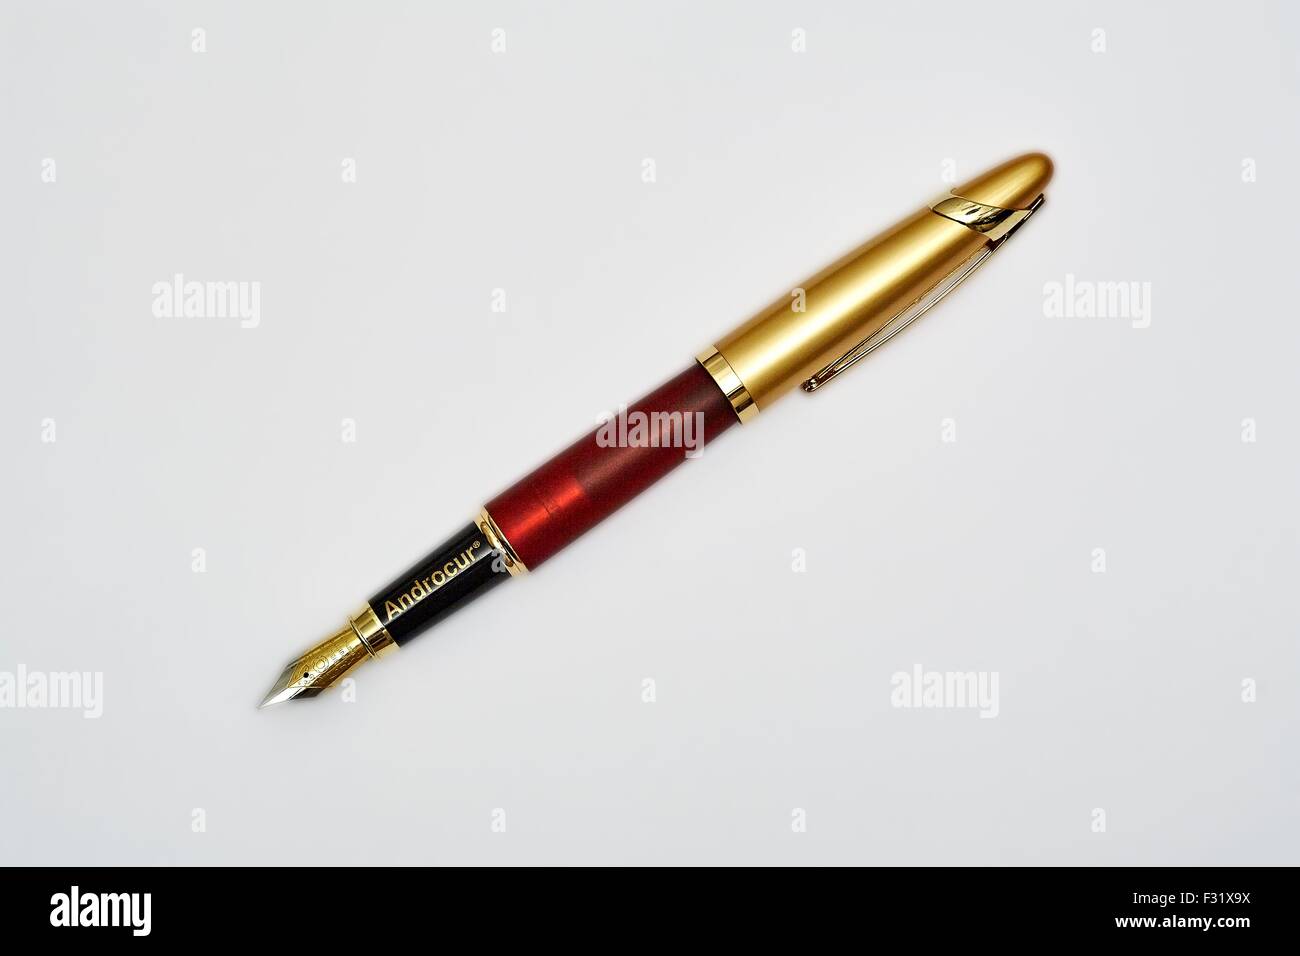 The Gold Ink Pen Is Mightier than the Sword Iridium Point Made in